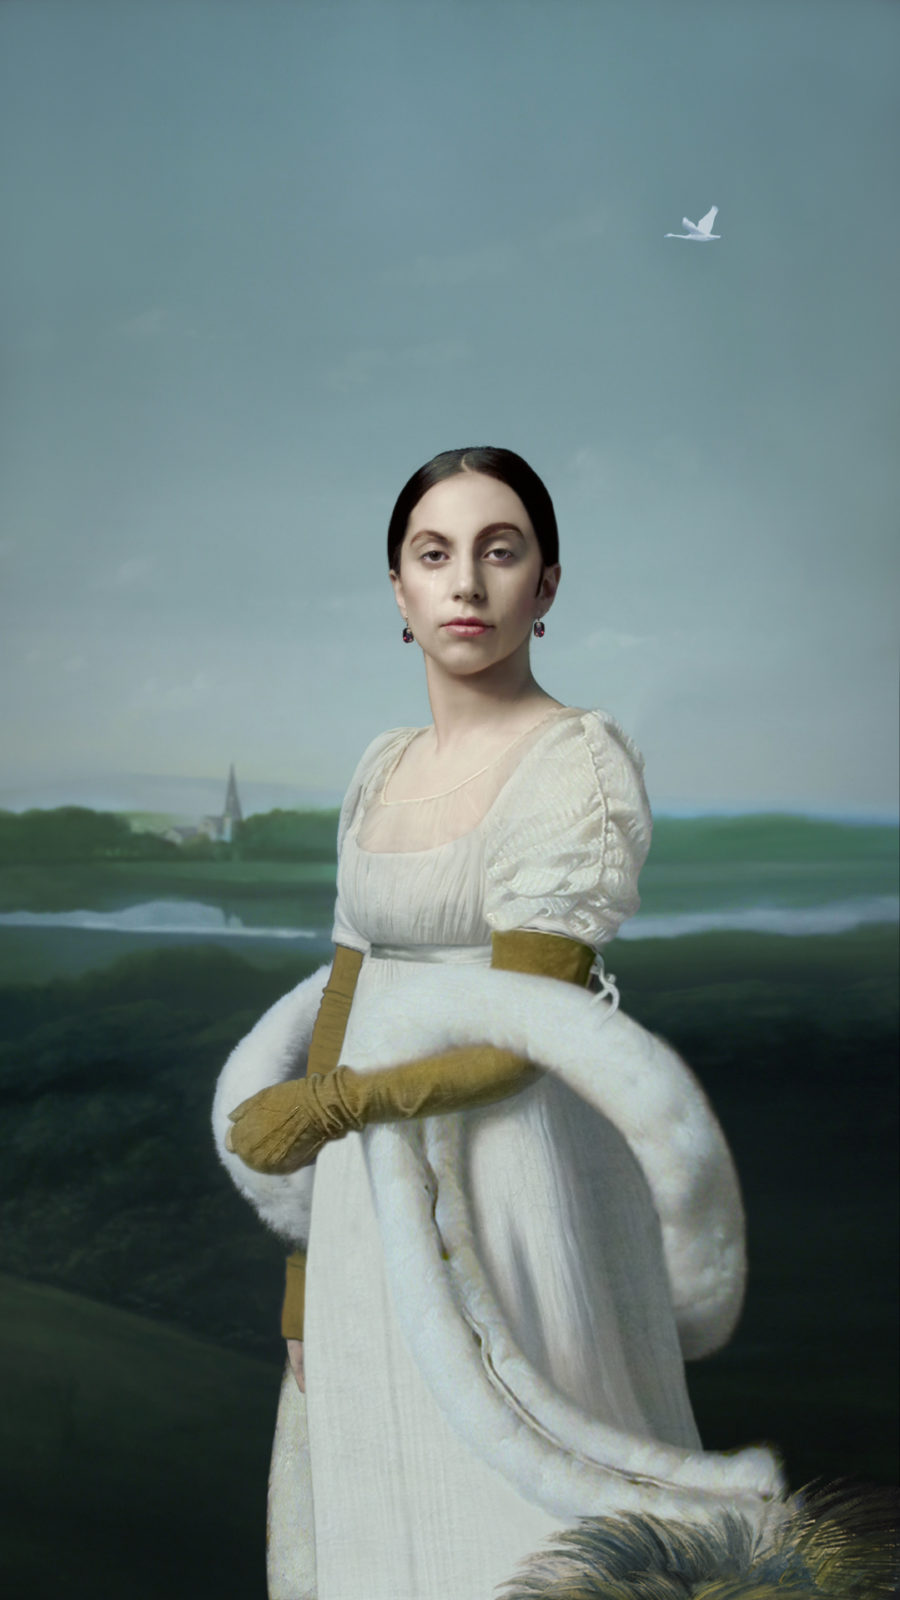 Robert Wilson’s video portrait depicts Lady Gaga in the guise of an early 19th century French aristocrat. Styled as the famous painting of Mademoiselle Caroline Riviere, in the collection Louvre by Neoclassical artist Jean Auguste Dominque Ingres, Lady Gaga inhabits the persona of the original sitter, an elegant teenager who died within a year of the painting's completion.